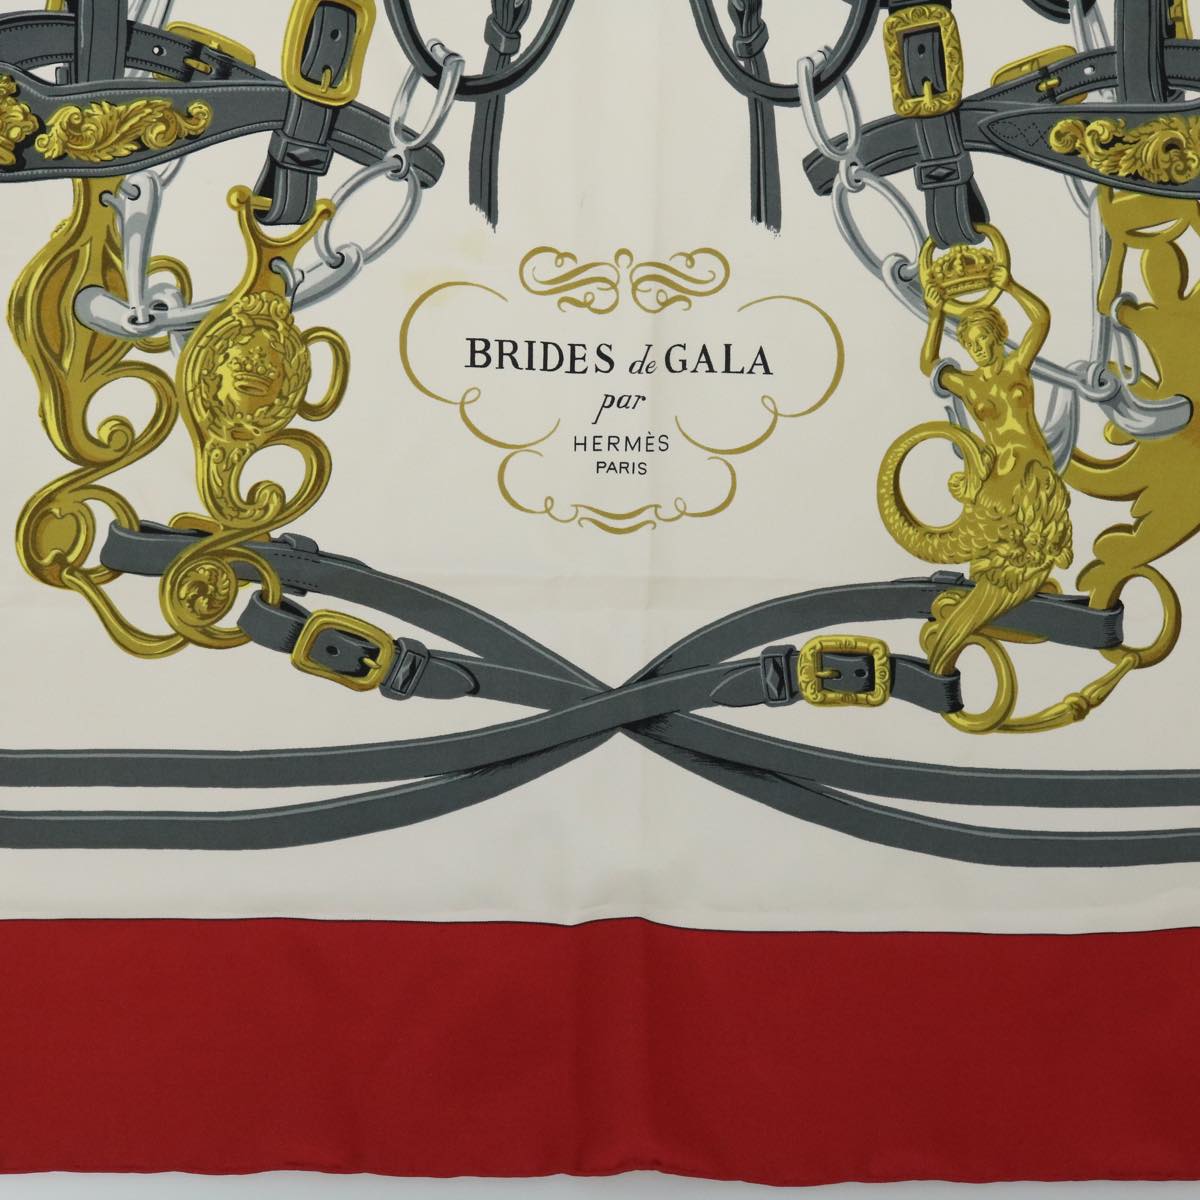 HERMES Carre 90 BRIDES de GALA Scarf Silk Red White Auth 51900